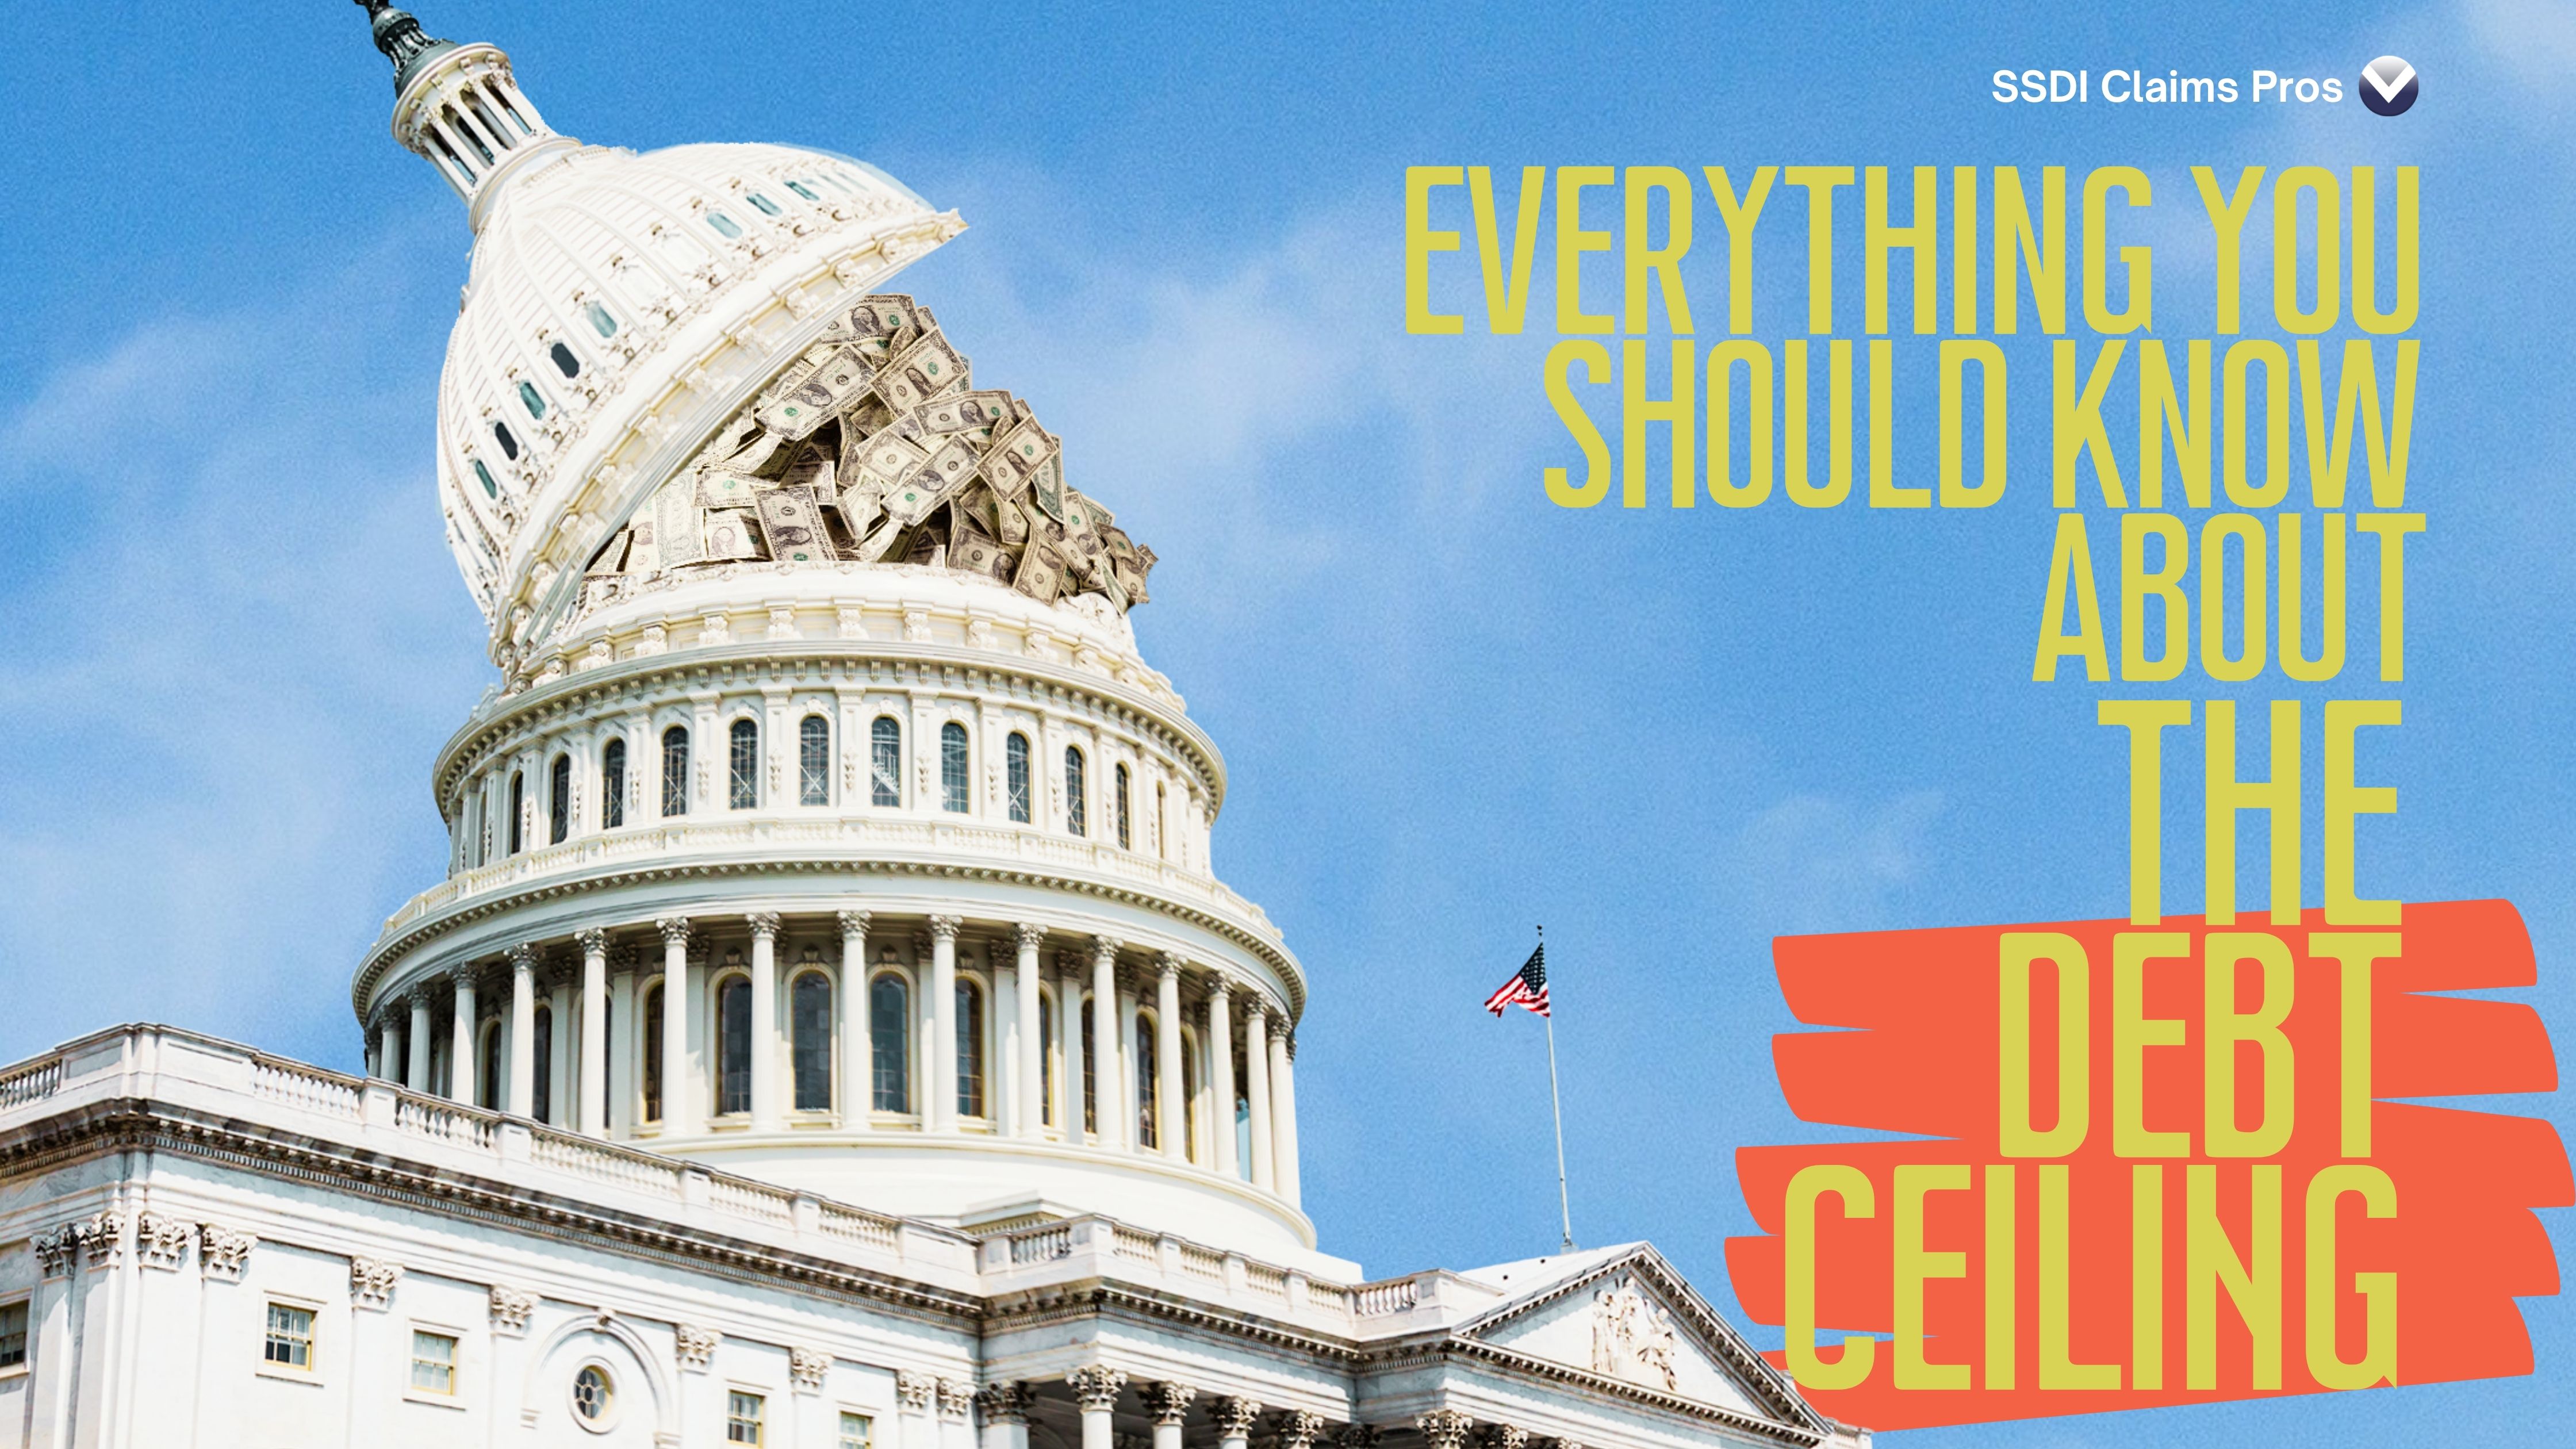 Everything You Should Know About The Debt Ceiling Blog Header Image